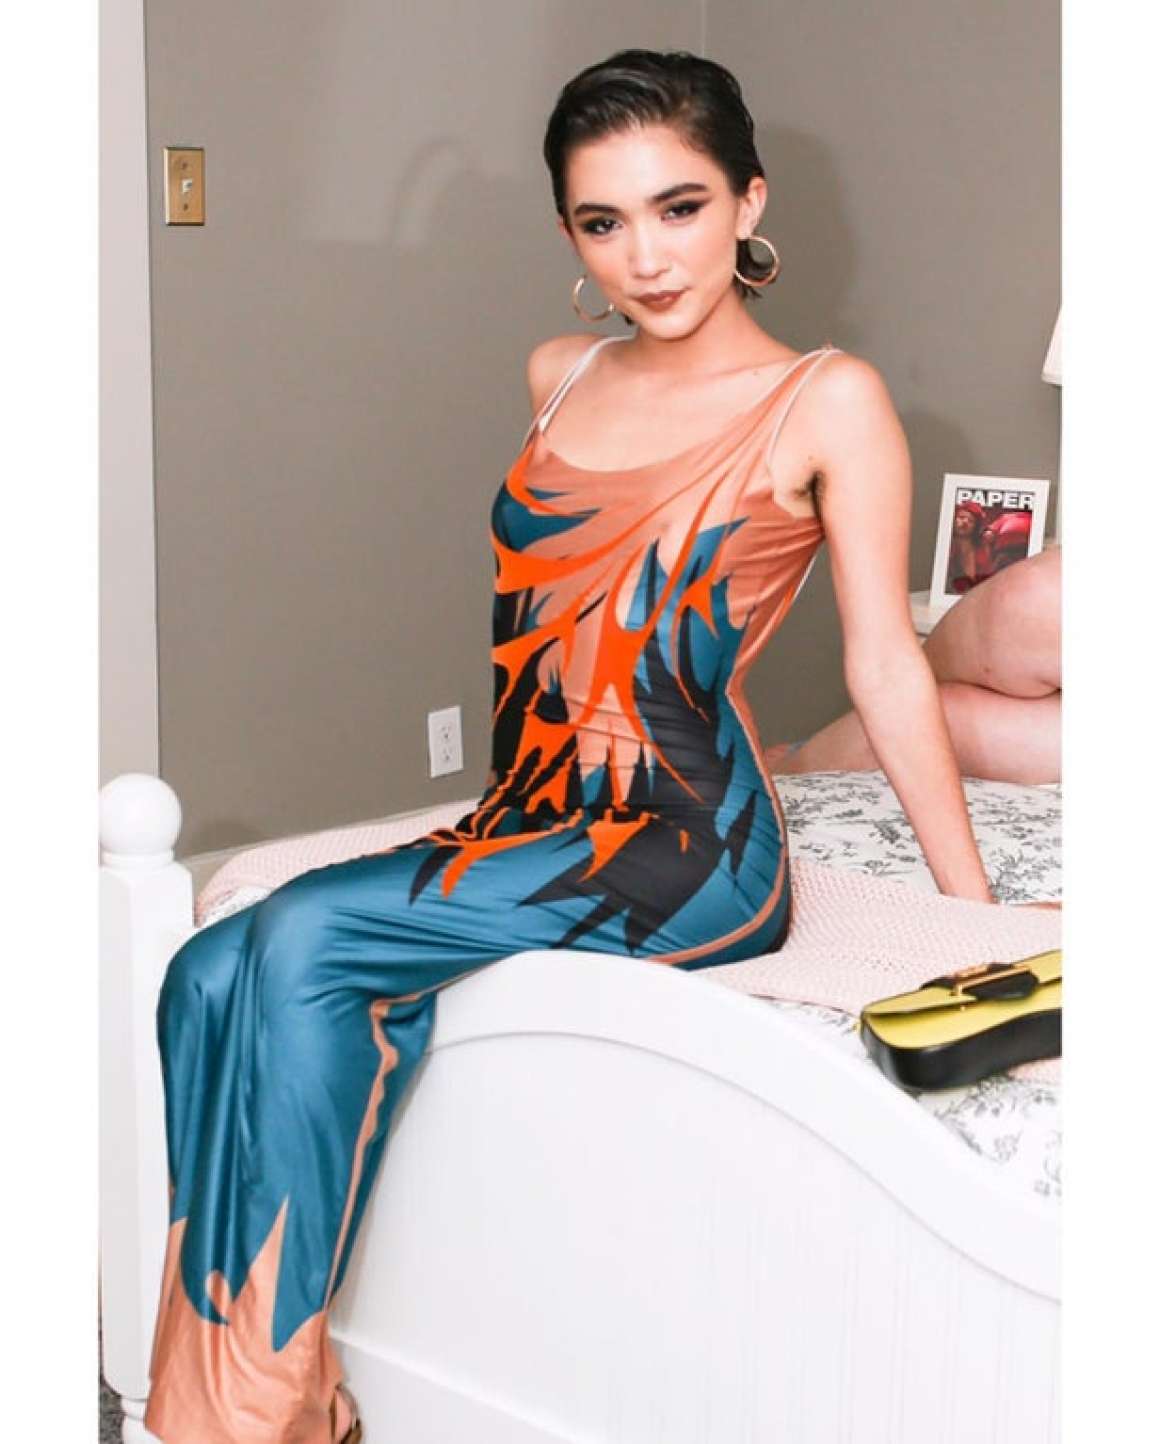 Sexy rowan pictures blanchard 61 Stacey